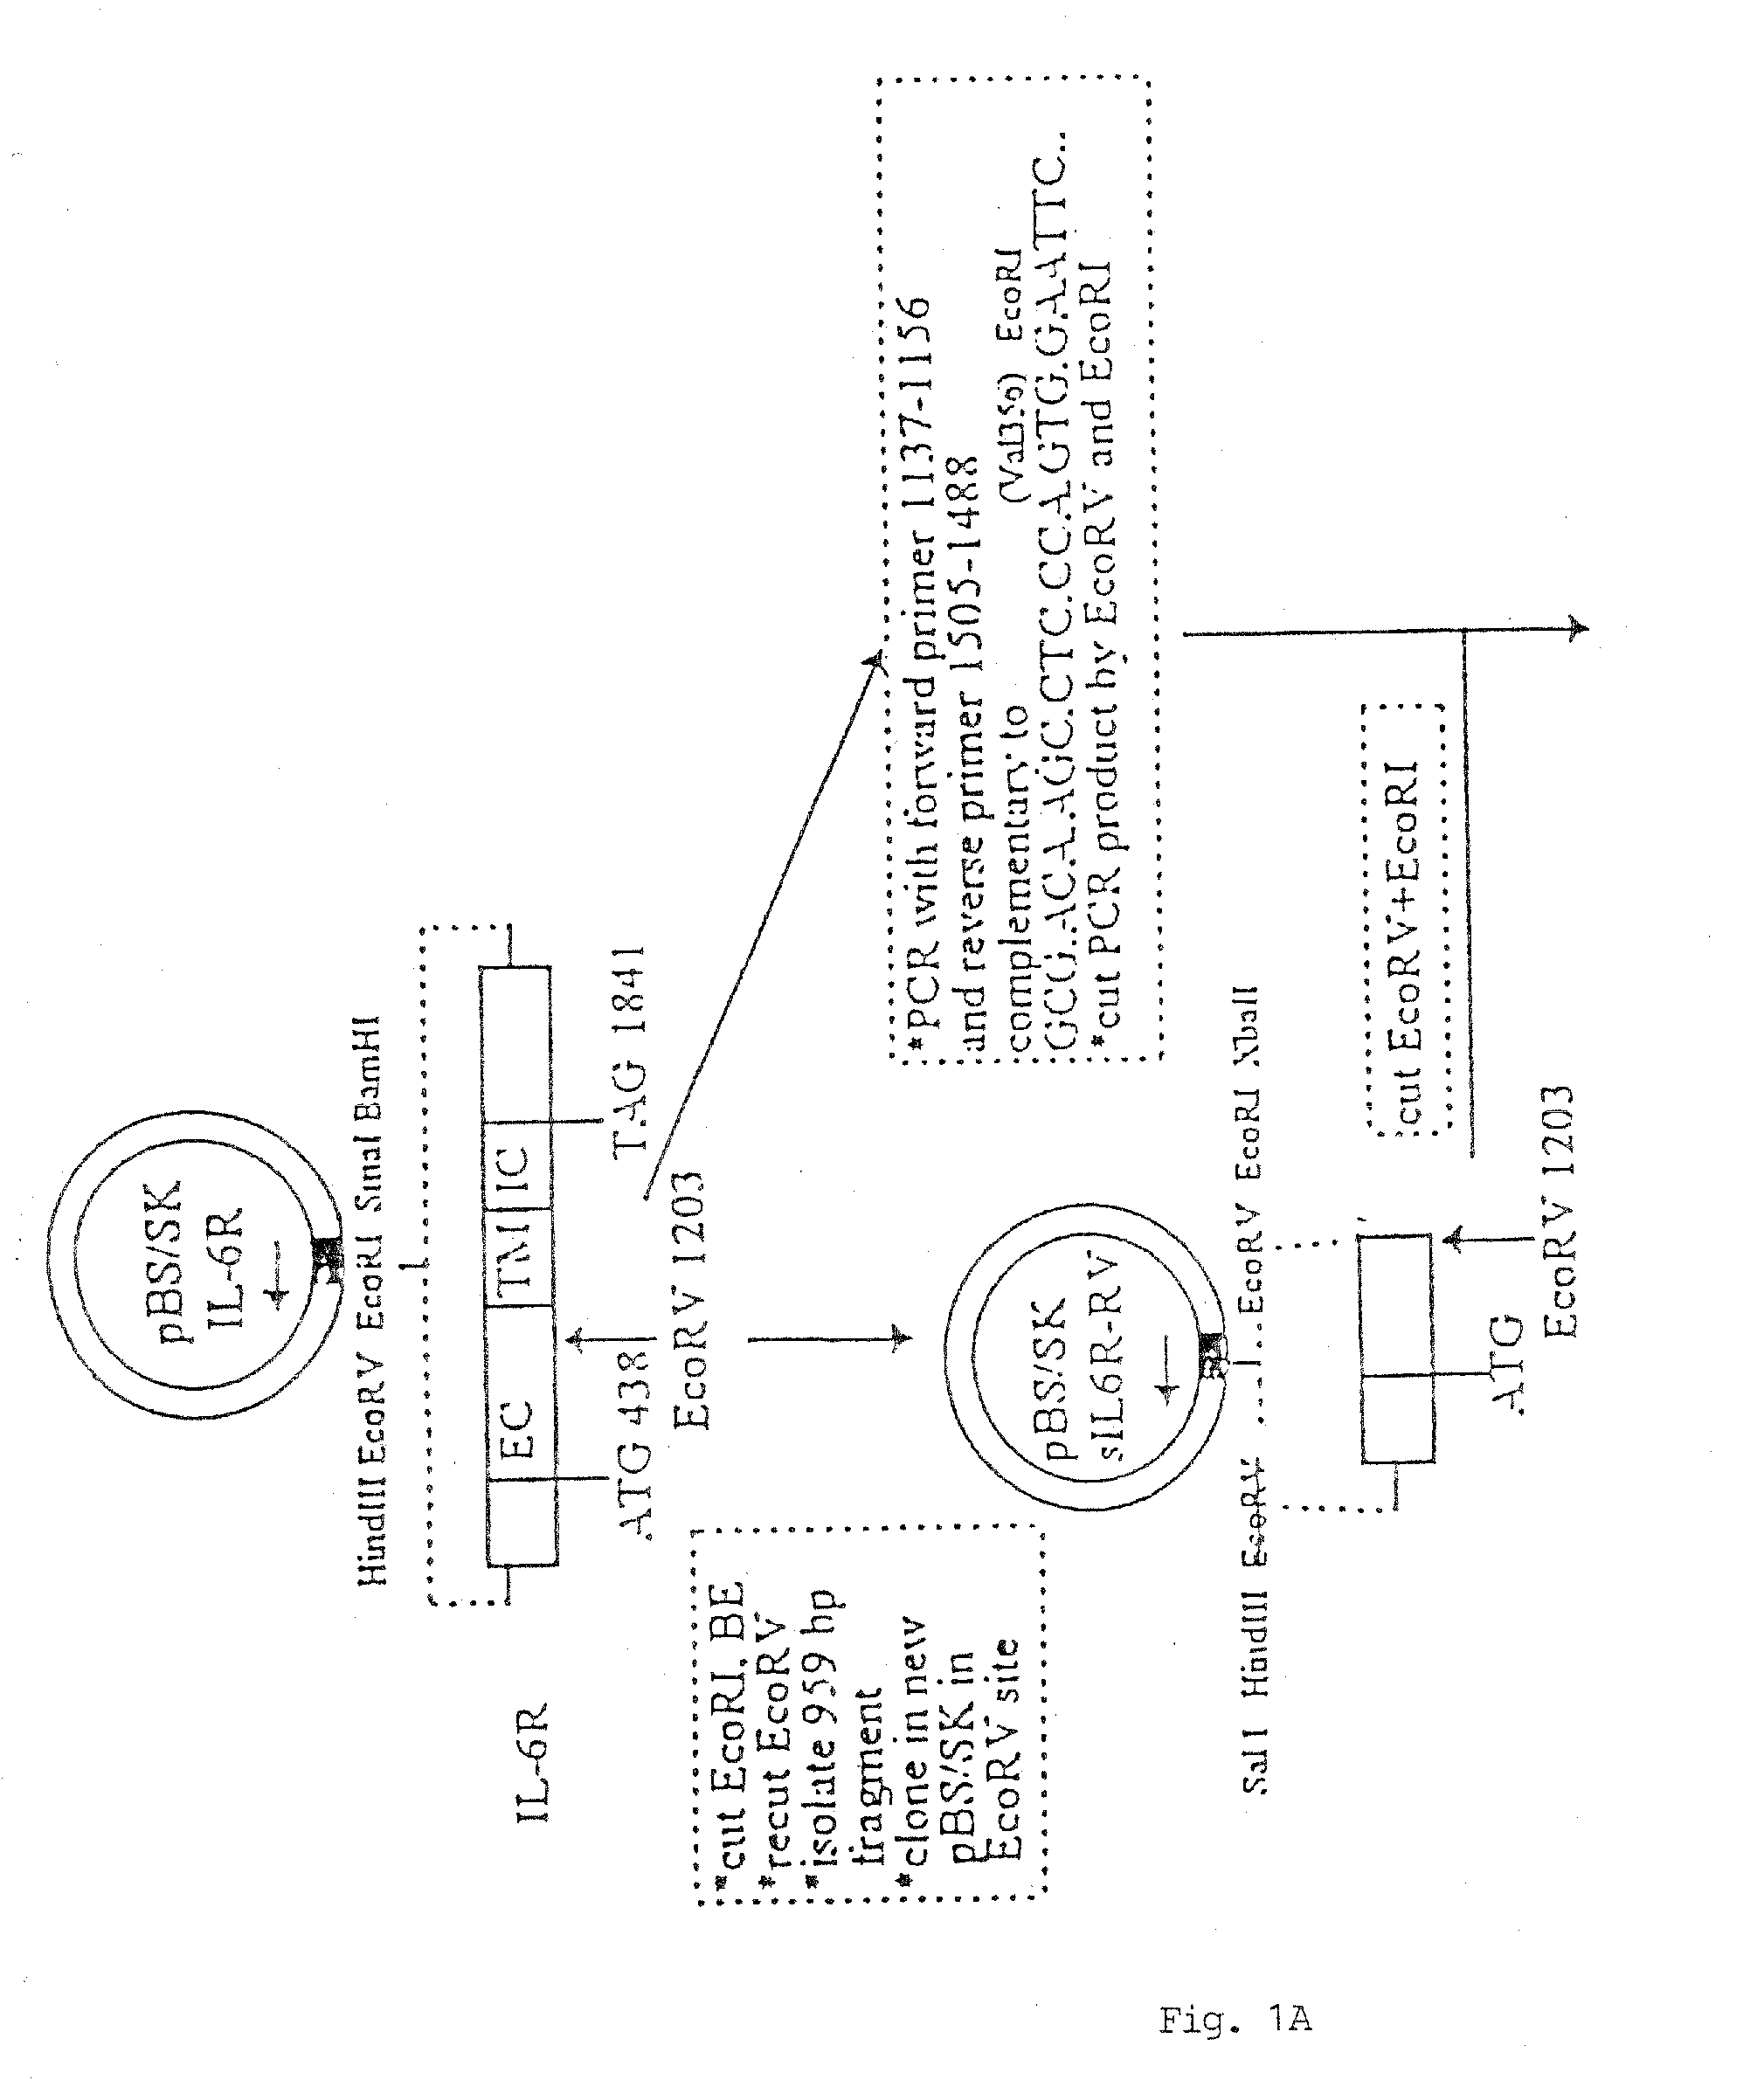 Chimeric Interleukin-6 Soluble Receptor/Ligand Protein, Analogs Thereof and Uses Thereof